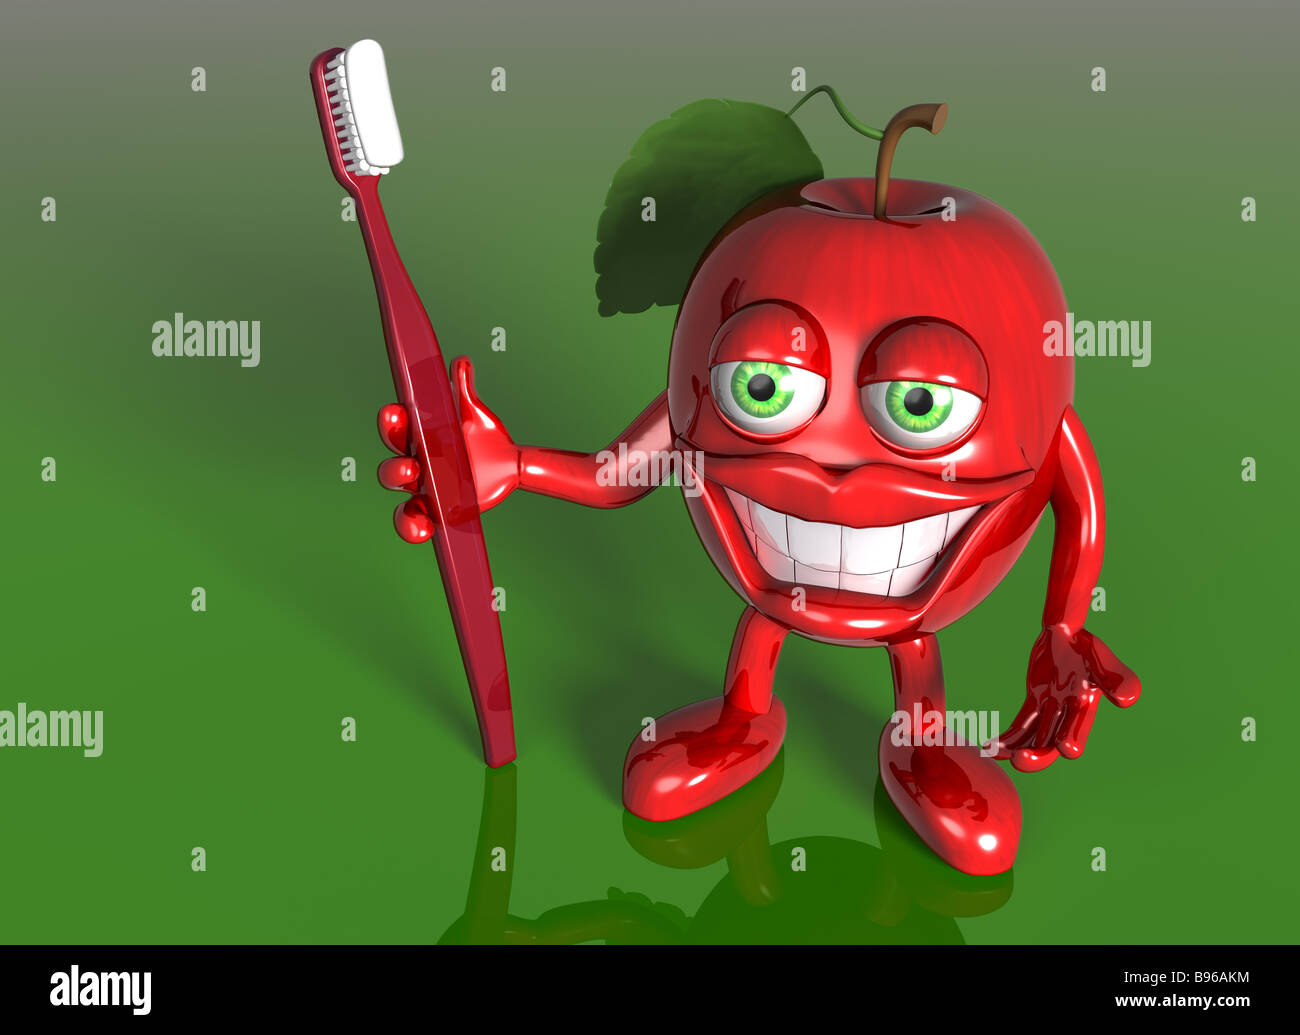 Illustration of a cartoon red apple with a big toothbrush and white teeth Stock Photo